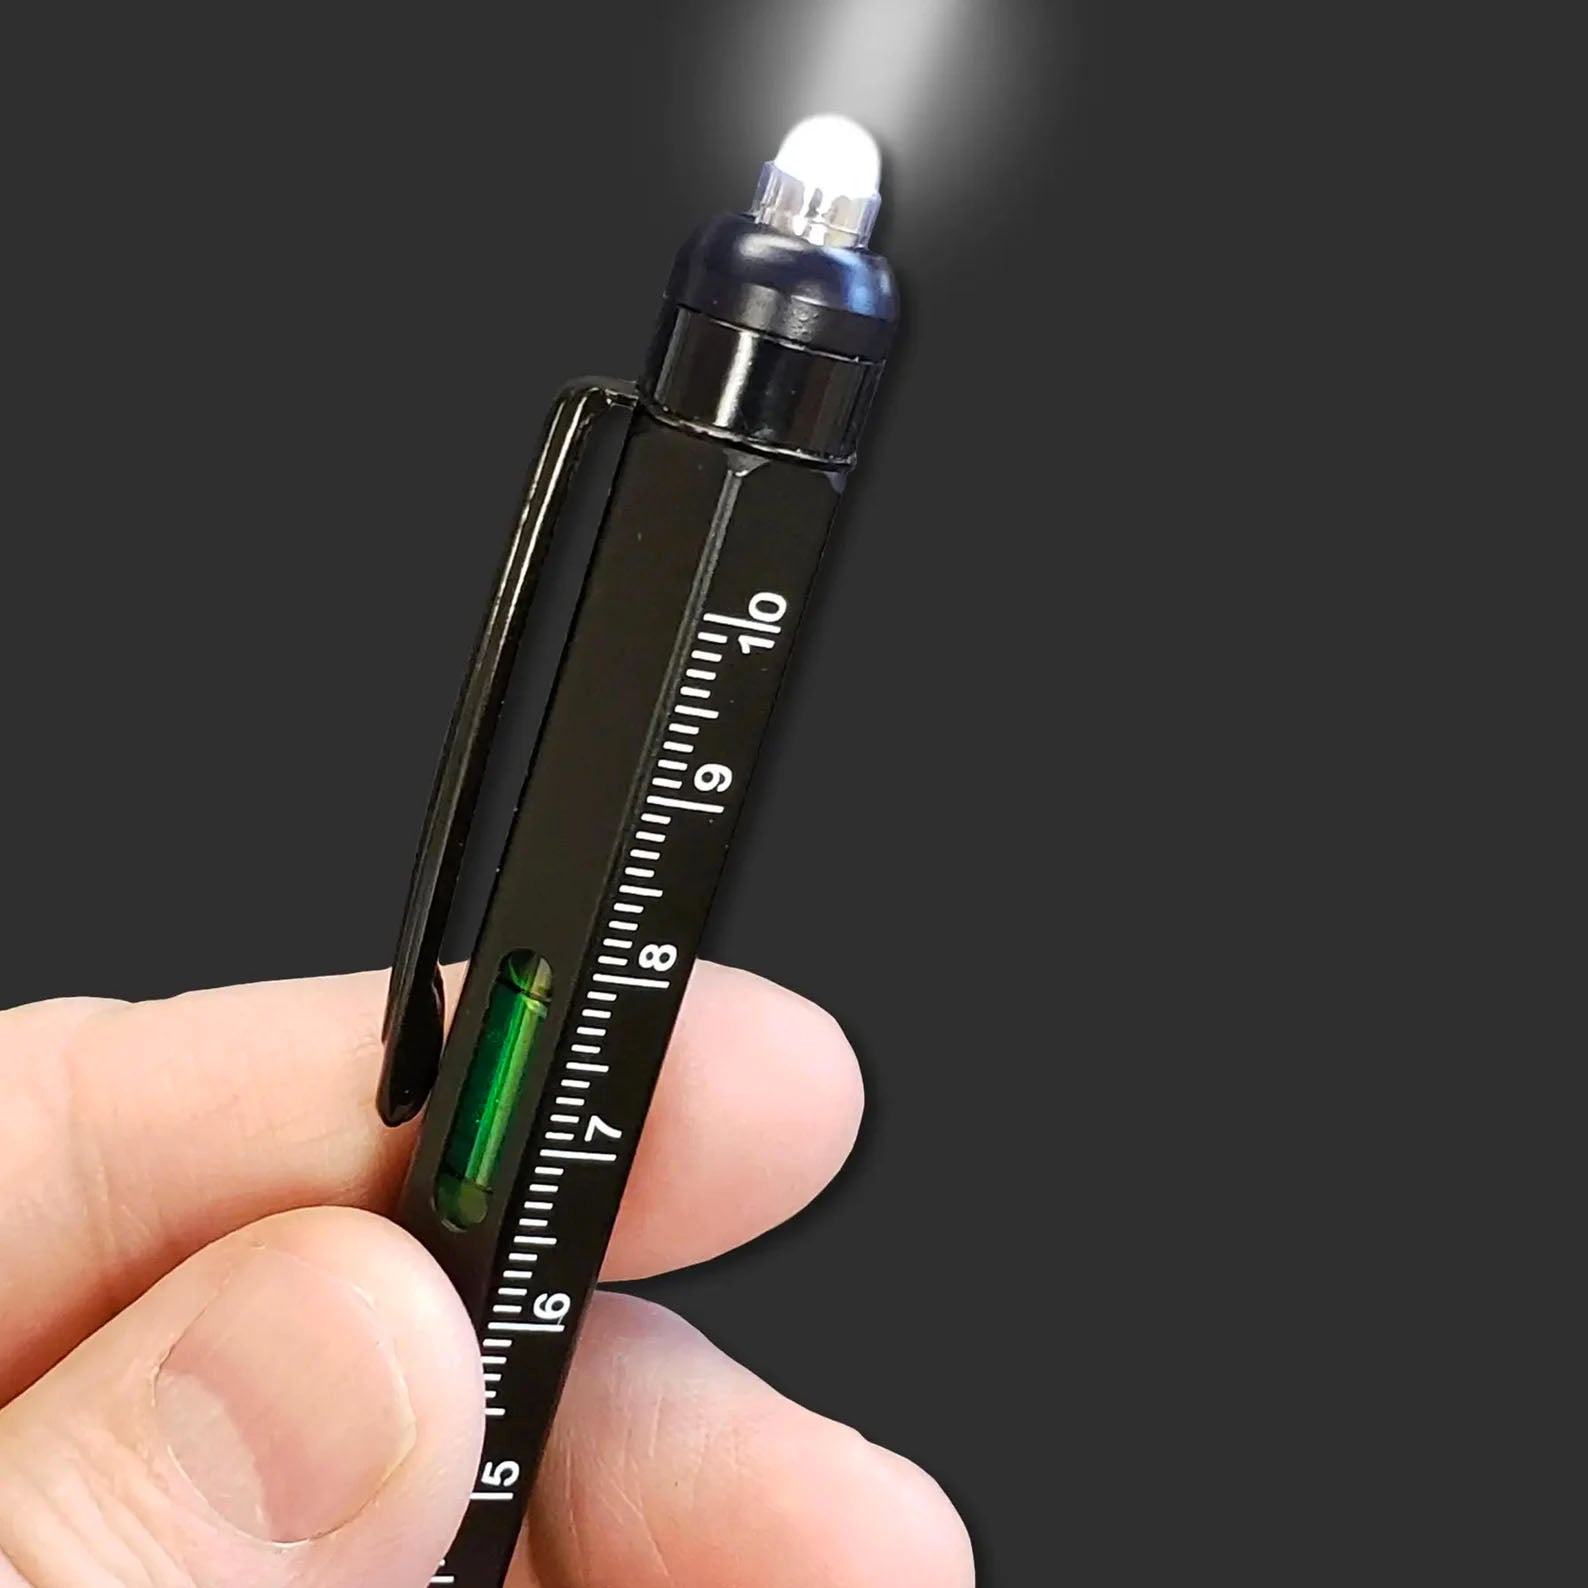 9-in-1 Builder's Pen Multifunction Tool For DIY projects, Handyman projects, Drafting ideas or just a cool christmas gift for dad or boyfriend!